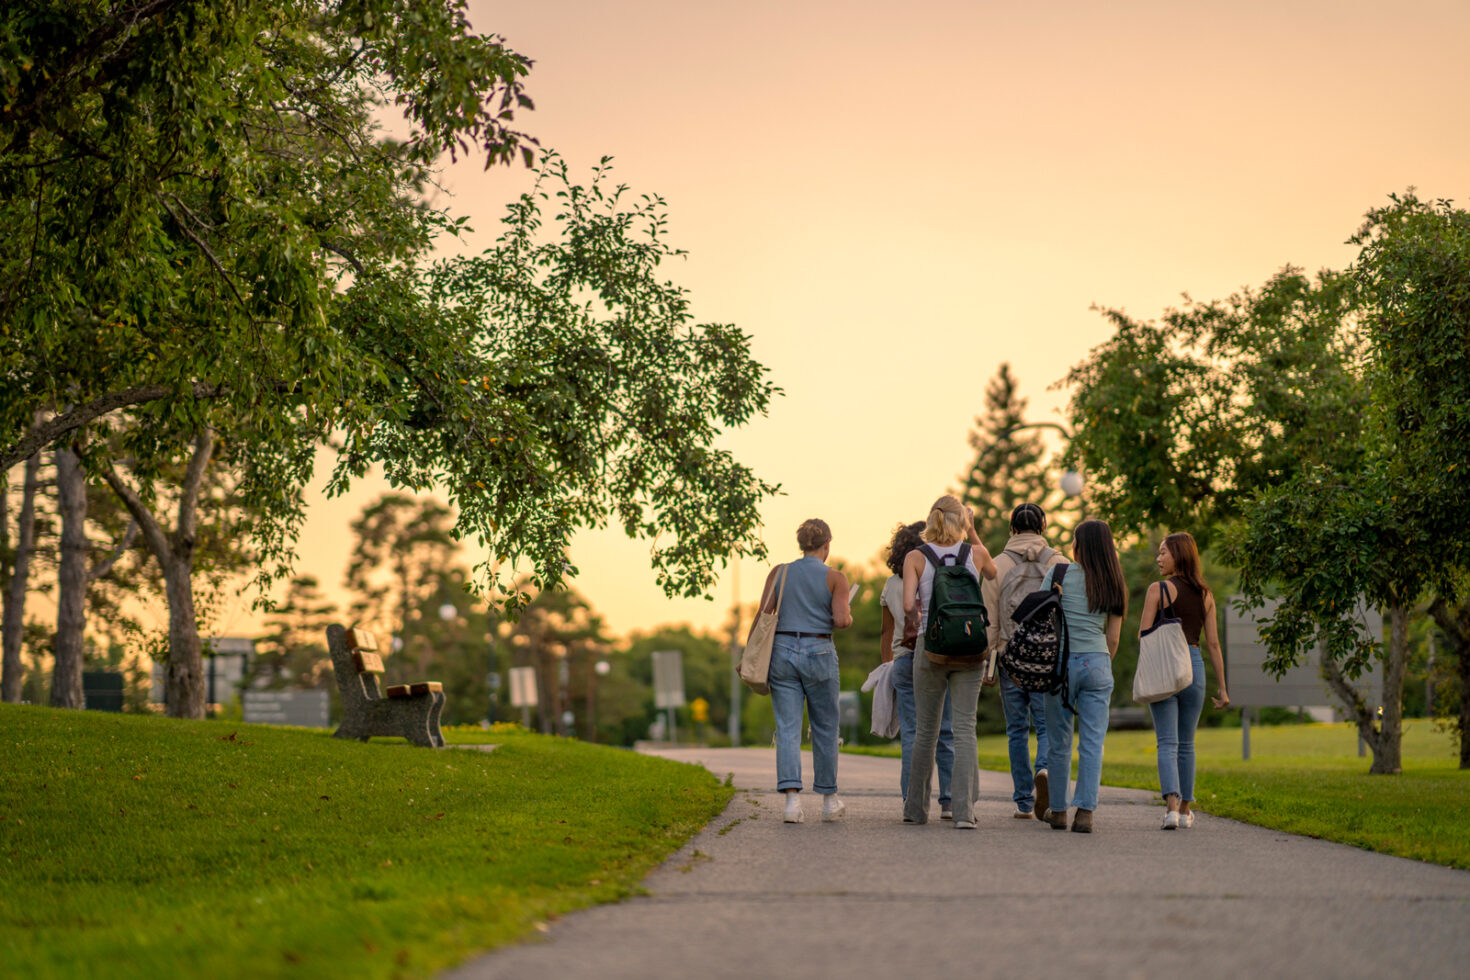 A group of students walking down a path in a college campus at sunset, enjoying the serene beauty of the evening.